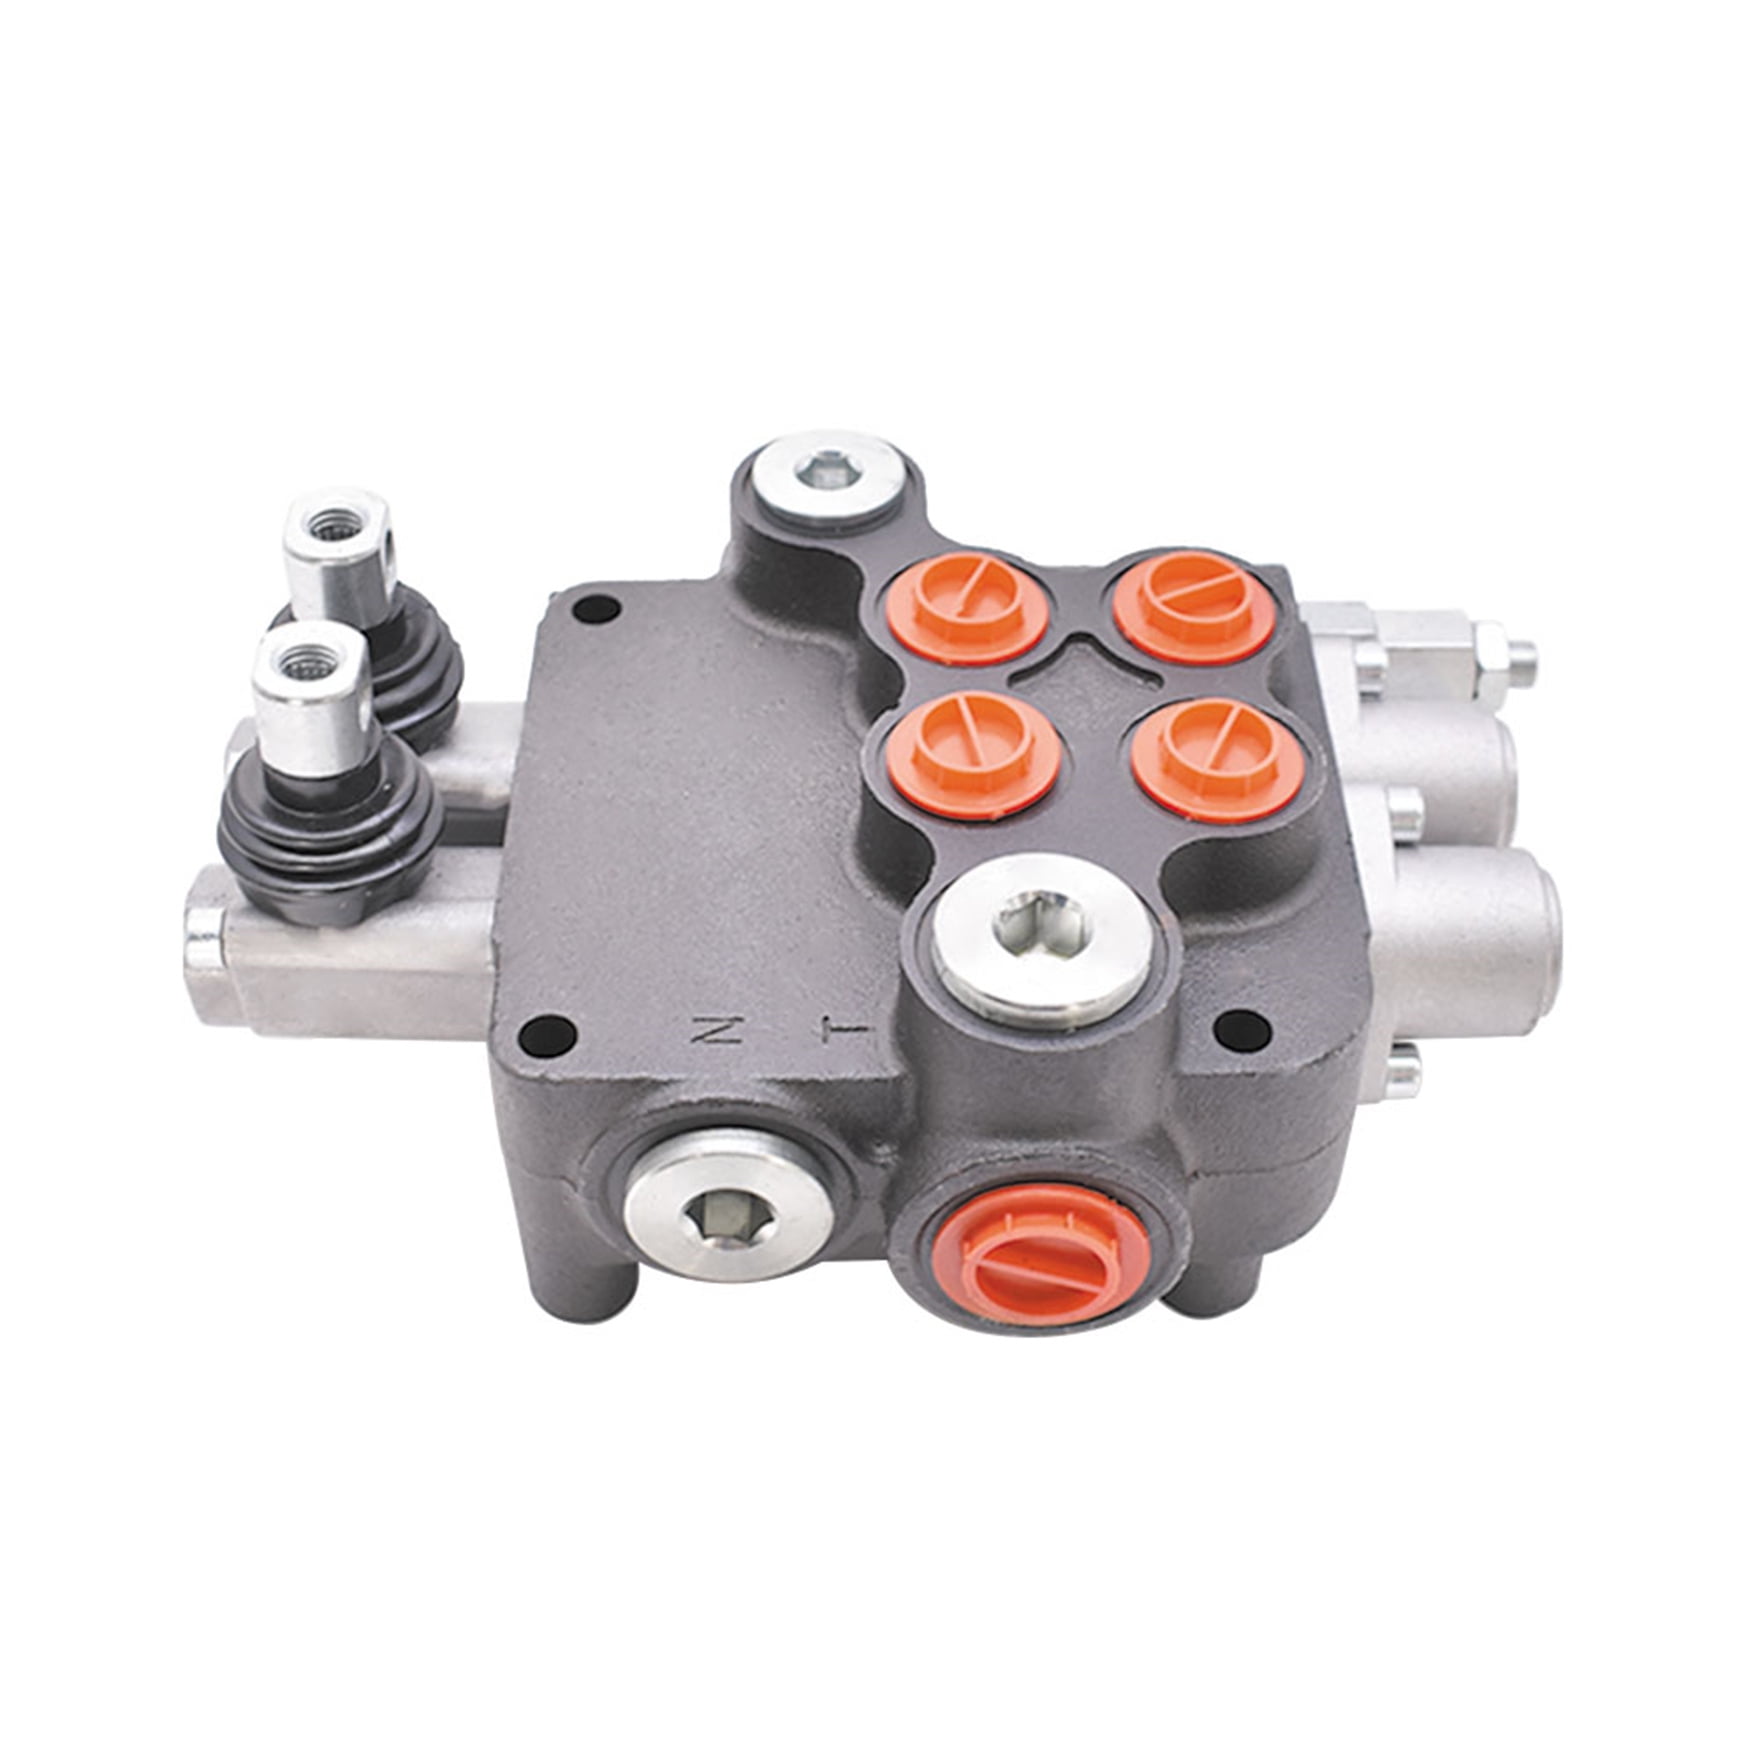 findmall Hydraulic Valve Hydraulic Directional Control Valve Double Acting  Valve Spool 21 GPM 3600 PSI SAE Ports for Small Tractors Tractors Loaders  Log Splitters